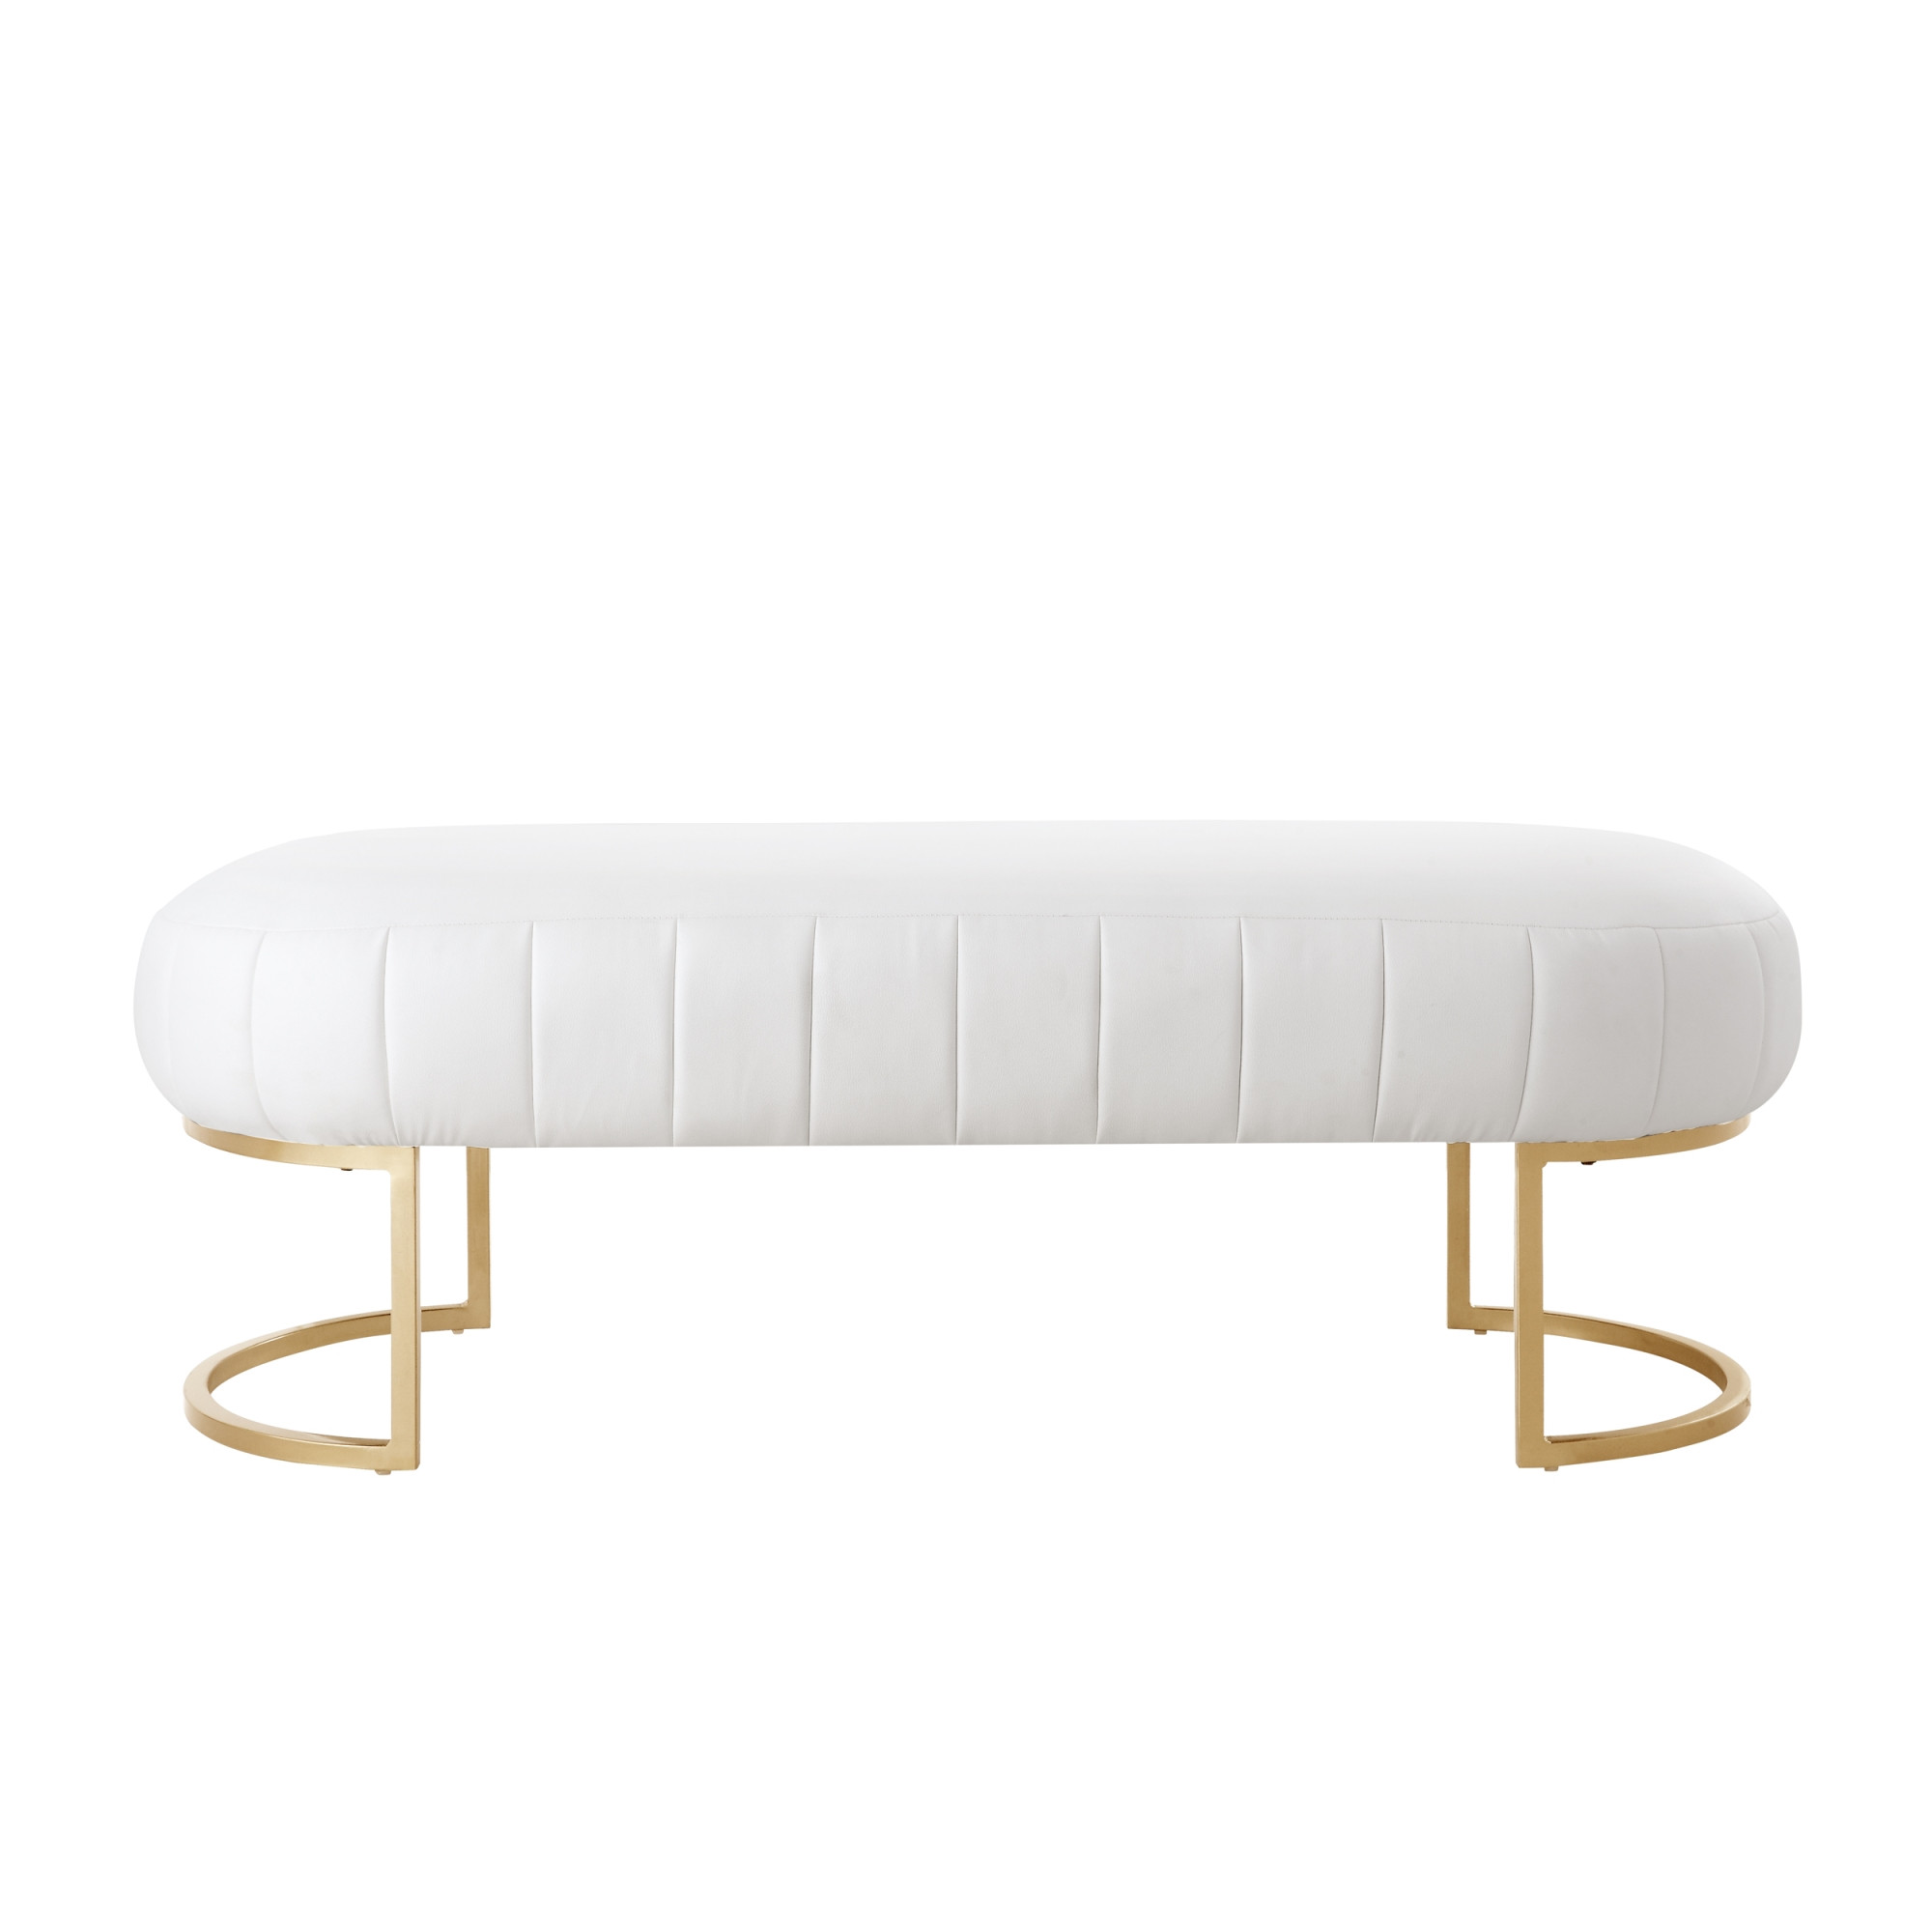 53" White and Gold Upholstered Faux Leather Bench-490975-1